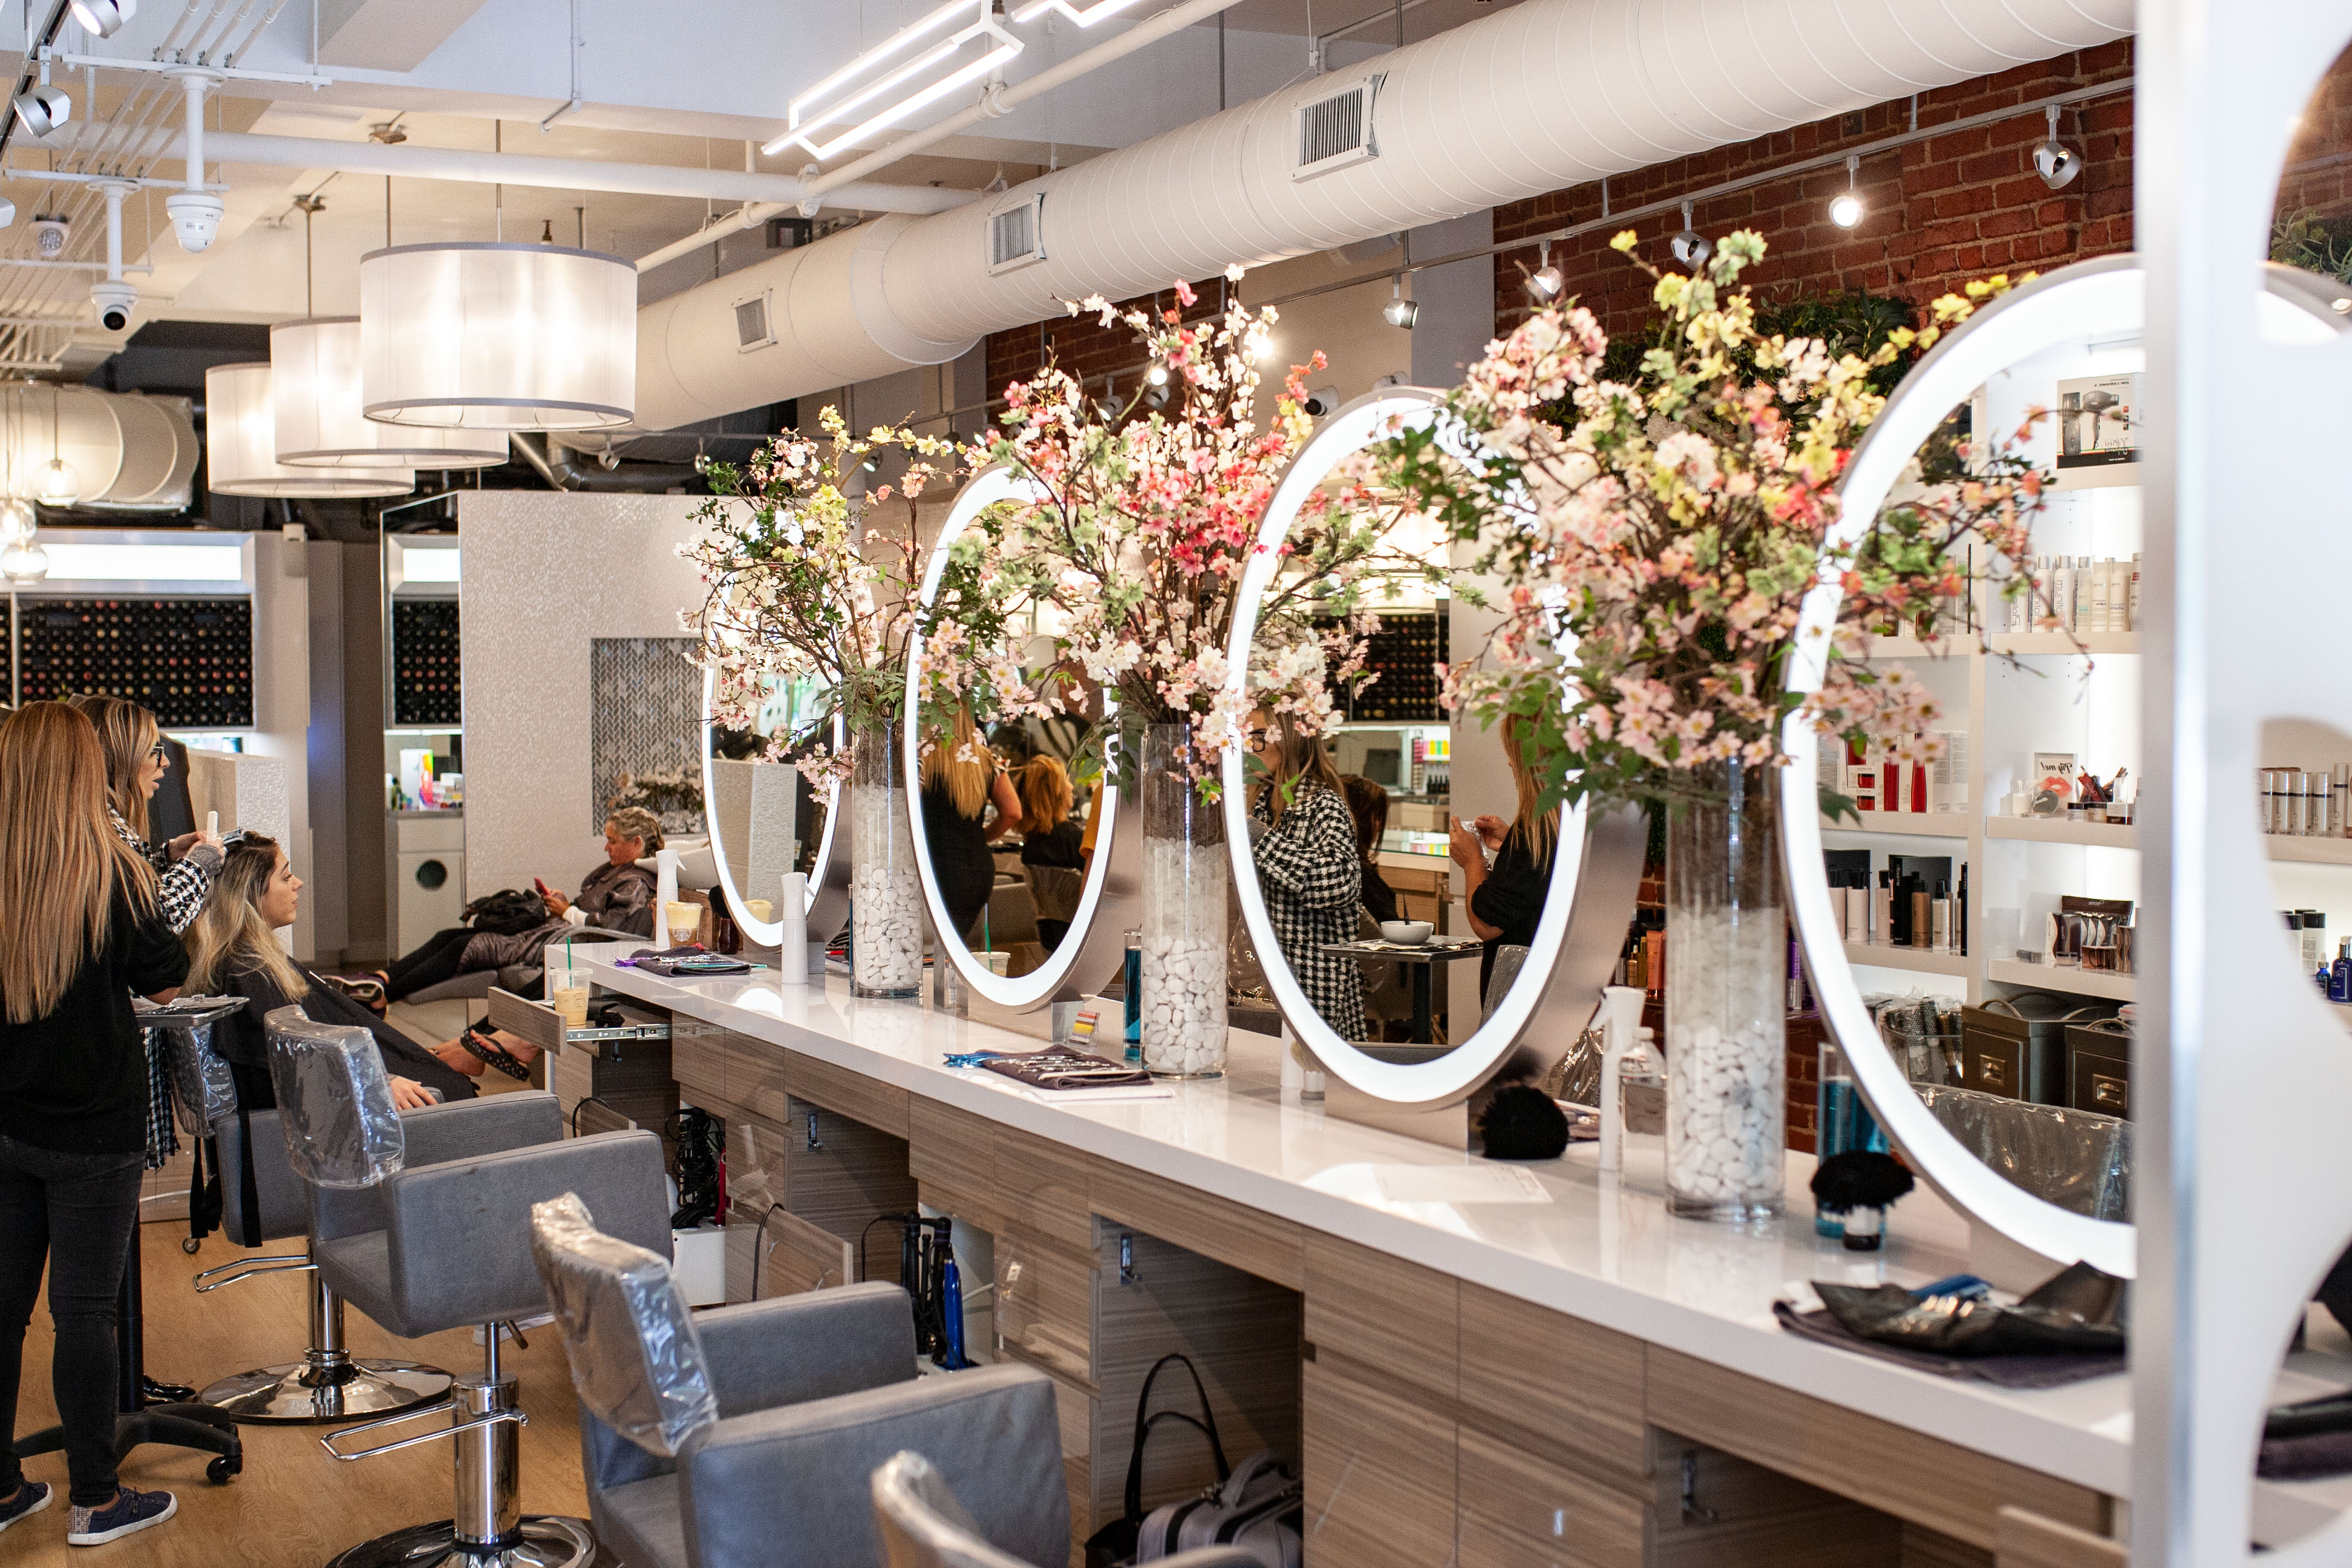 20 Hair Salons Near You In Summit Nj Find The Best Hair Salon For You. 